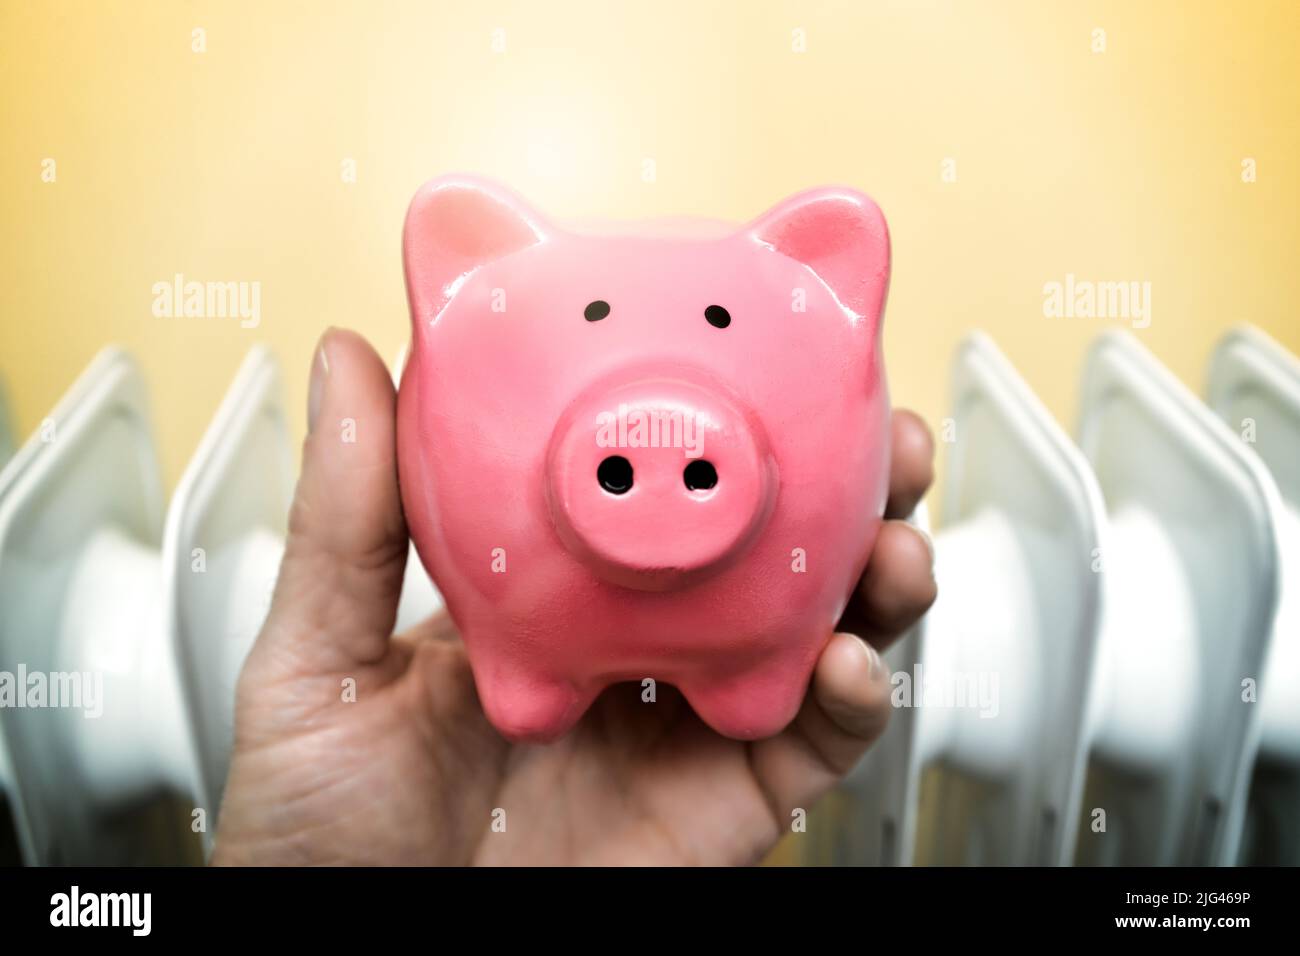 Hand holding a piggy bank in front of a radiator Stock Photo